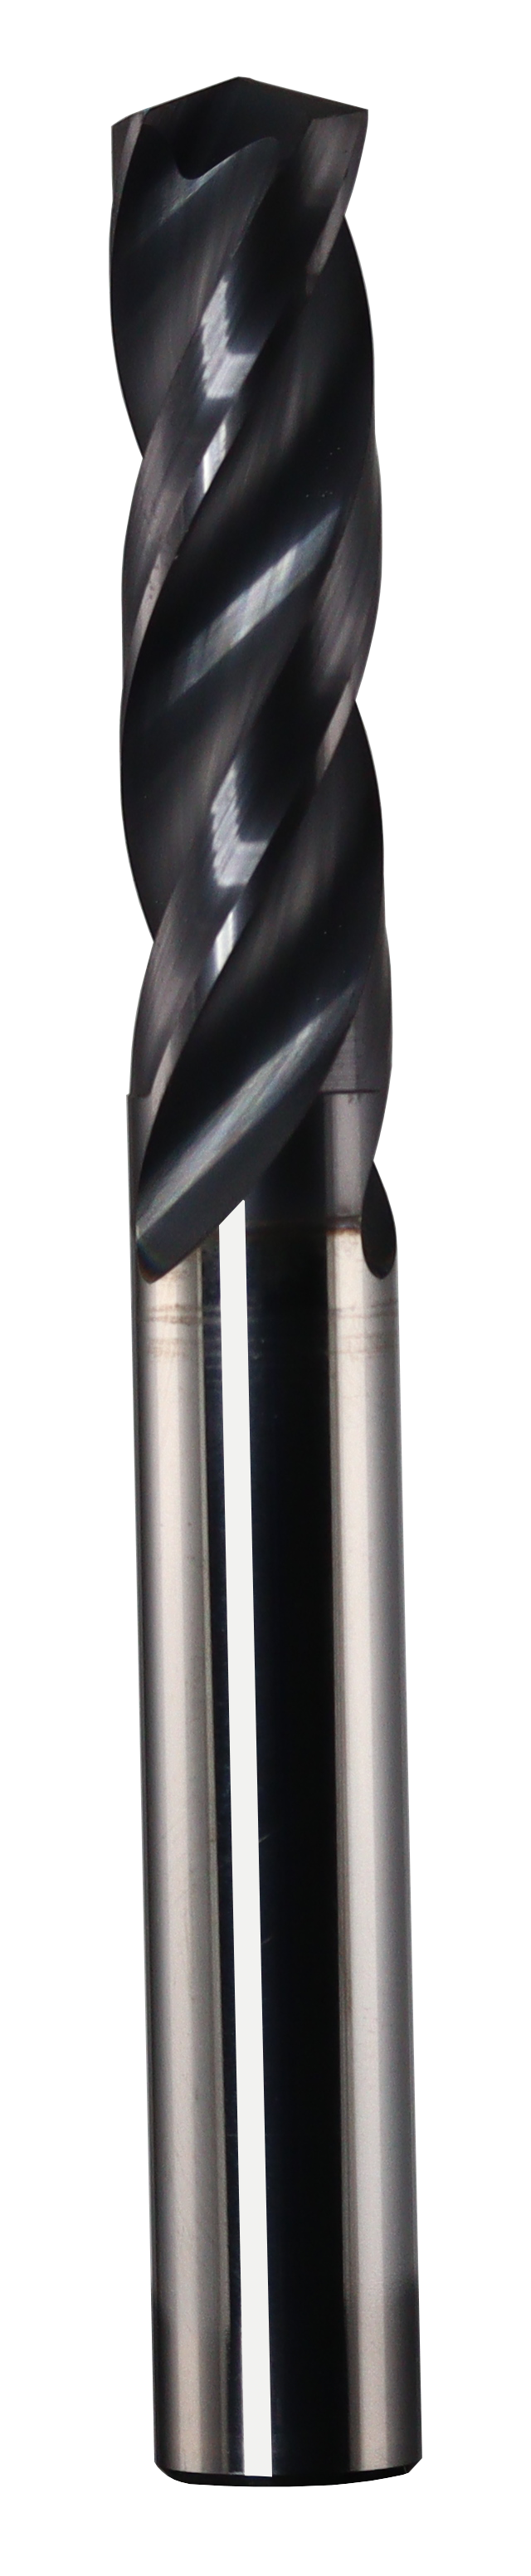 25/64" Dia, 150 Degree Point, Solid Carbide Drill - 58088